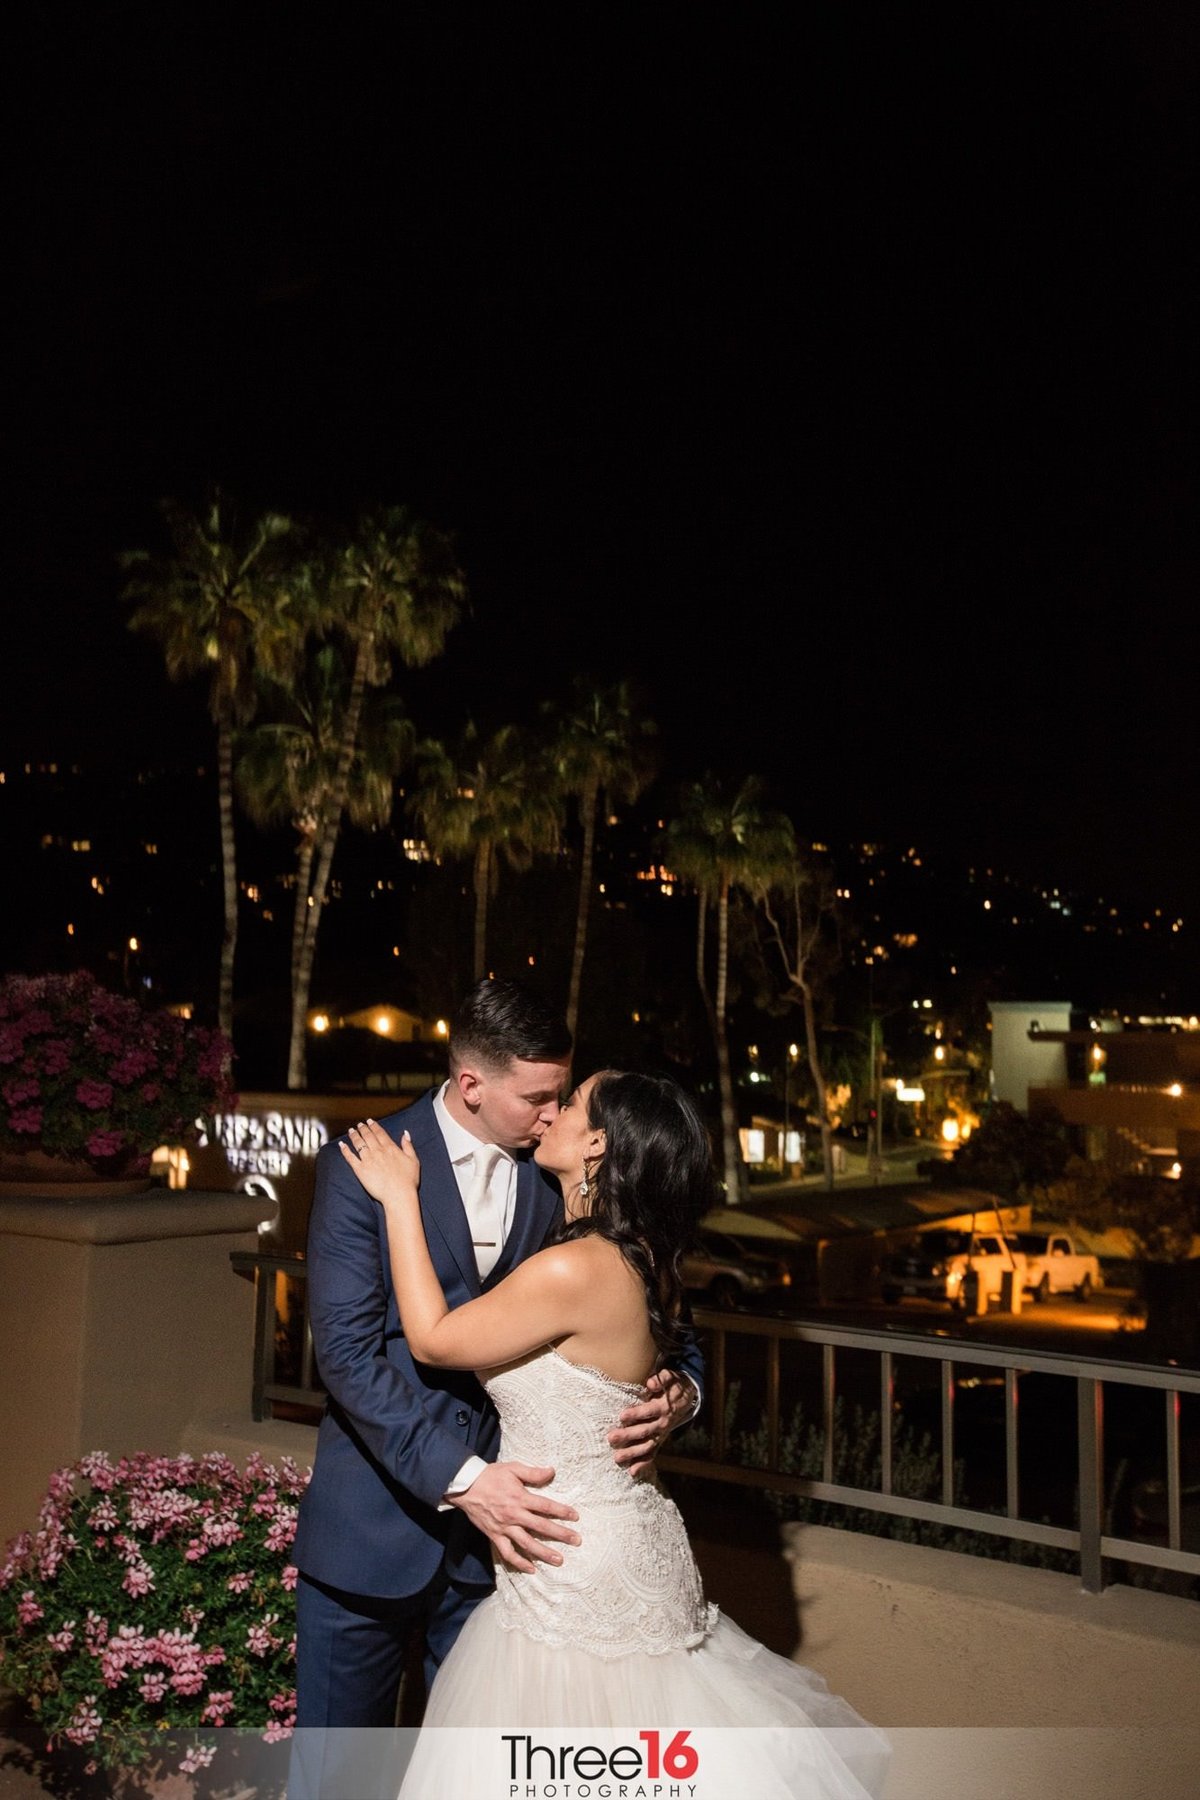 Passionate kiss shared by the Bride and Groom at night under the stars on the Surf and Sand Resort balcony